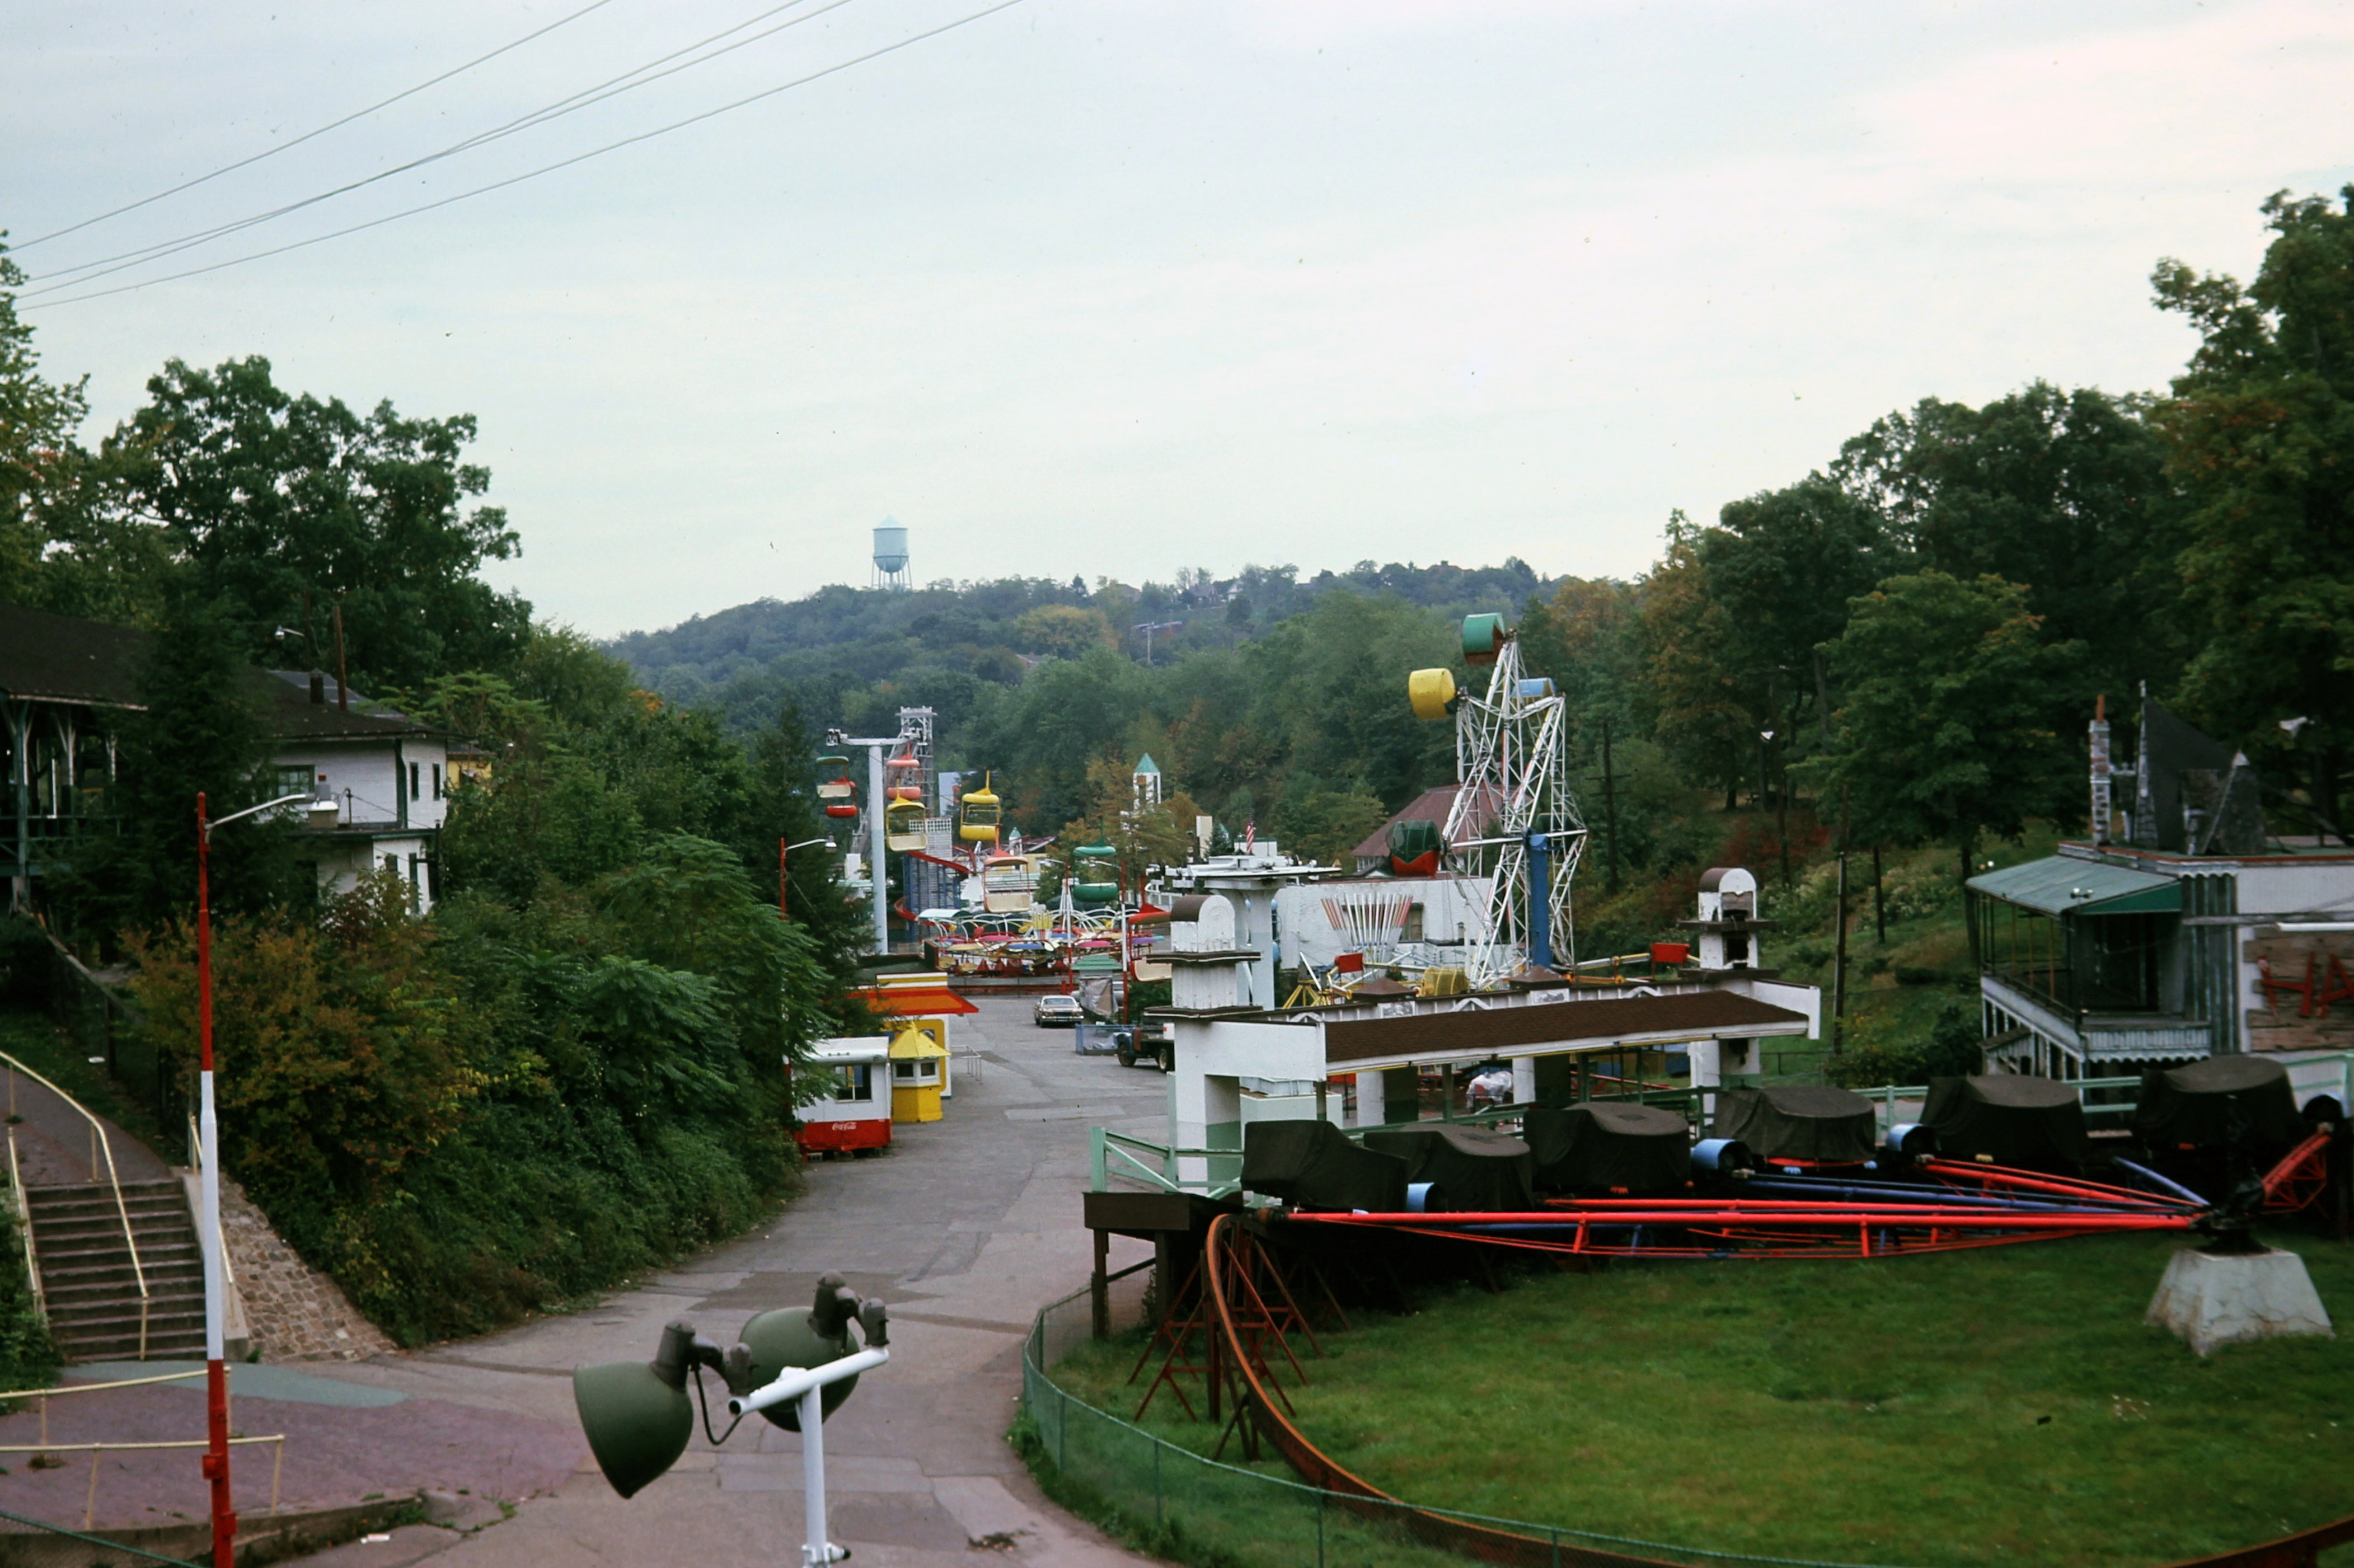 Looking down Midway, 1977